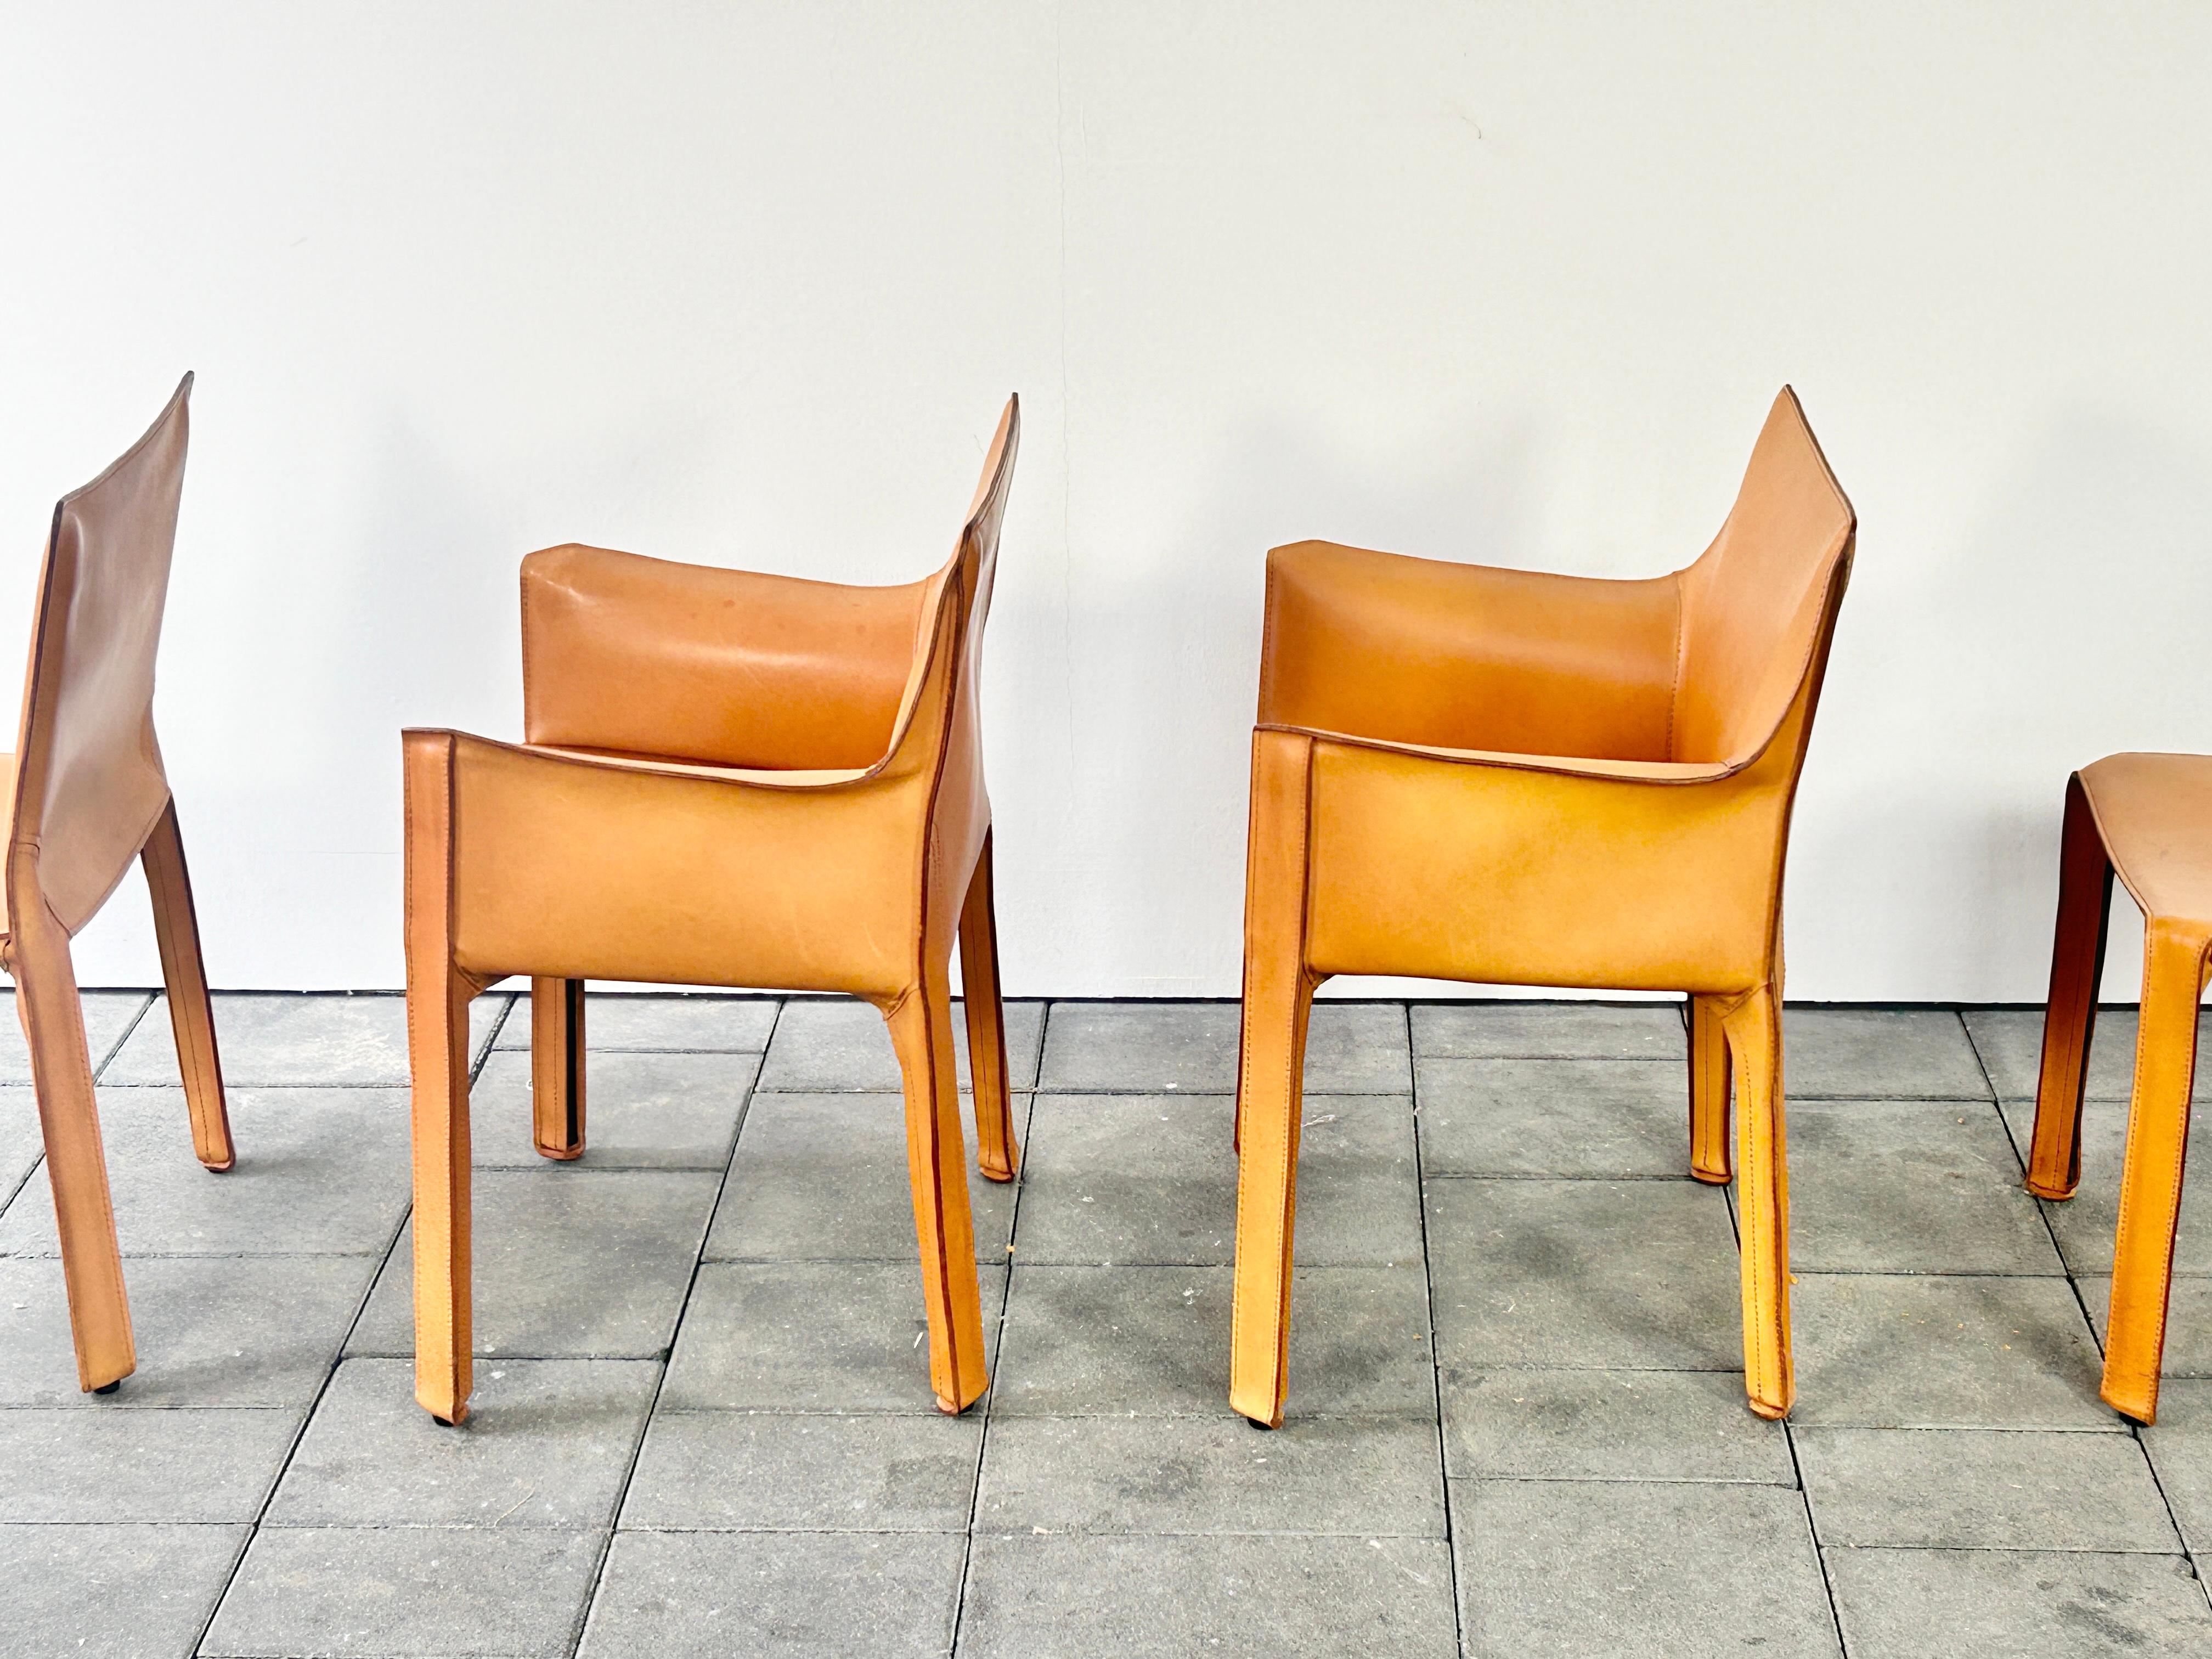 Italian Set of four Cassina Cab Chairs Designed by Mario Bellini 1978 in Natural Leather For Sale